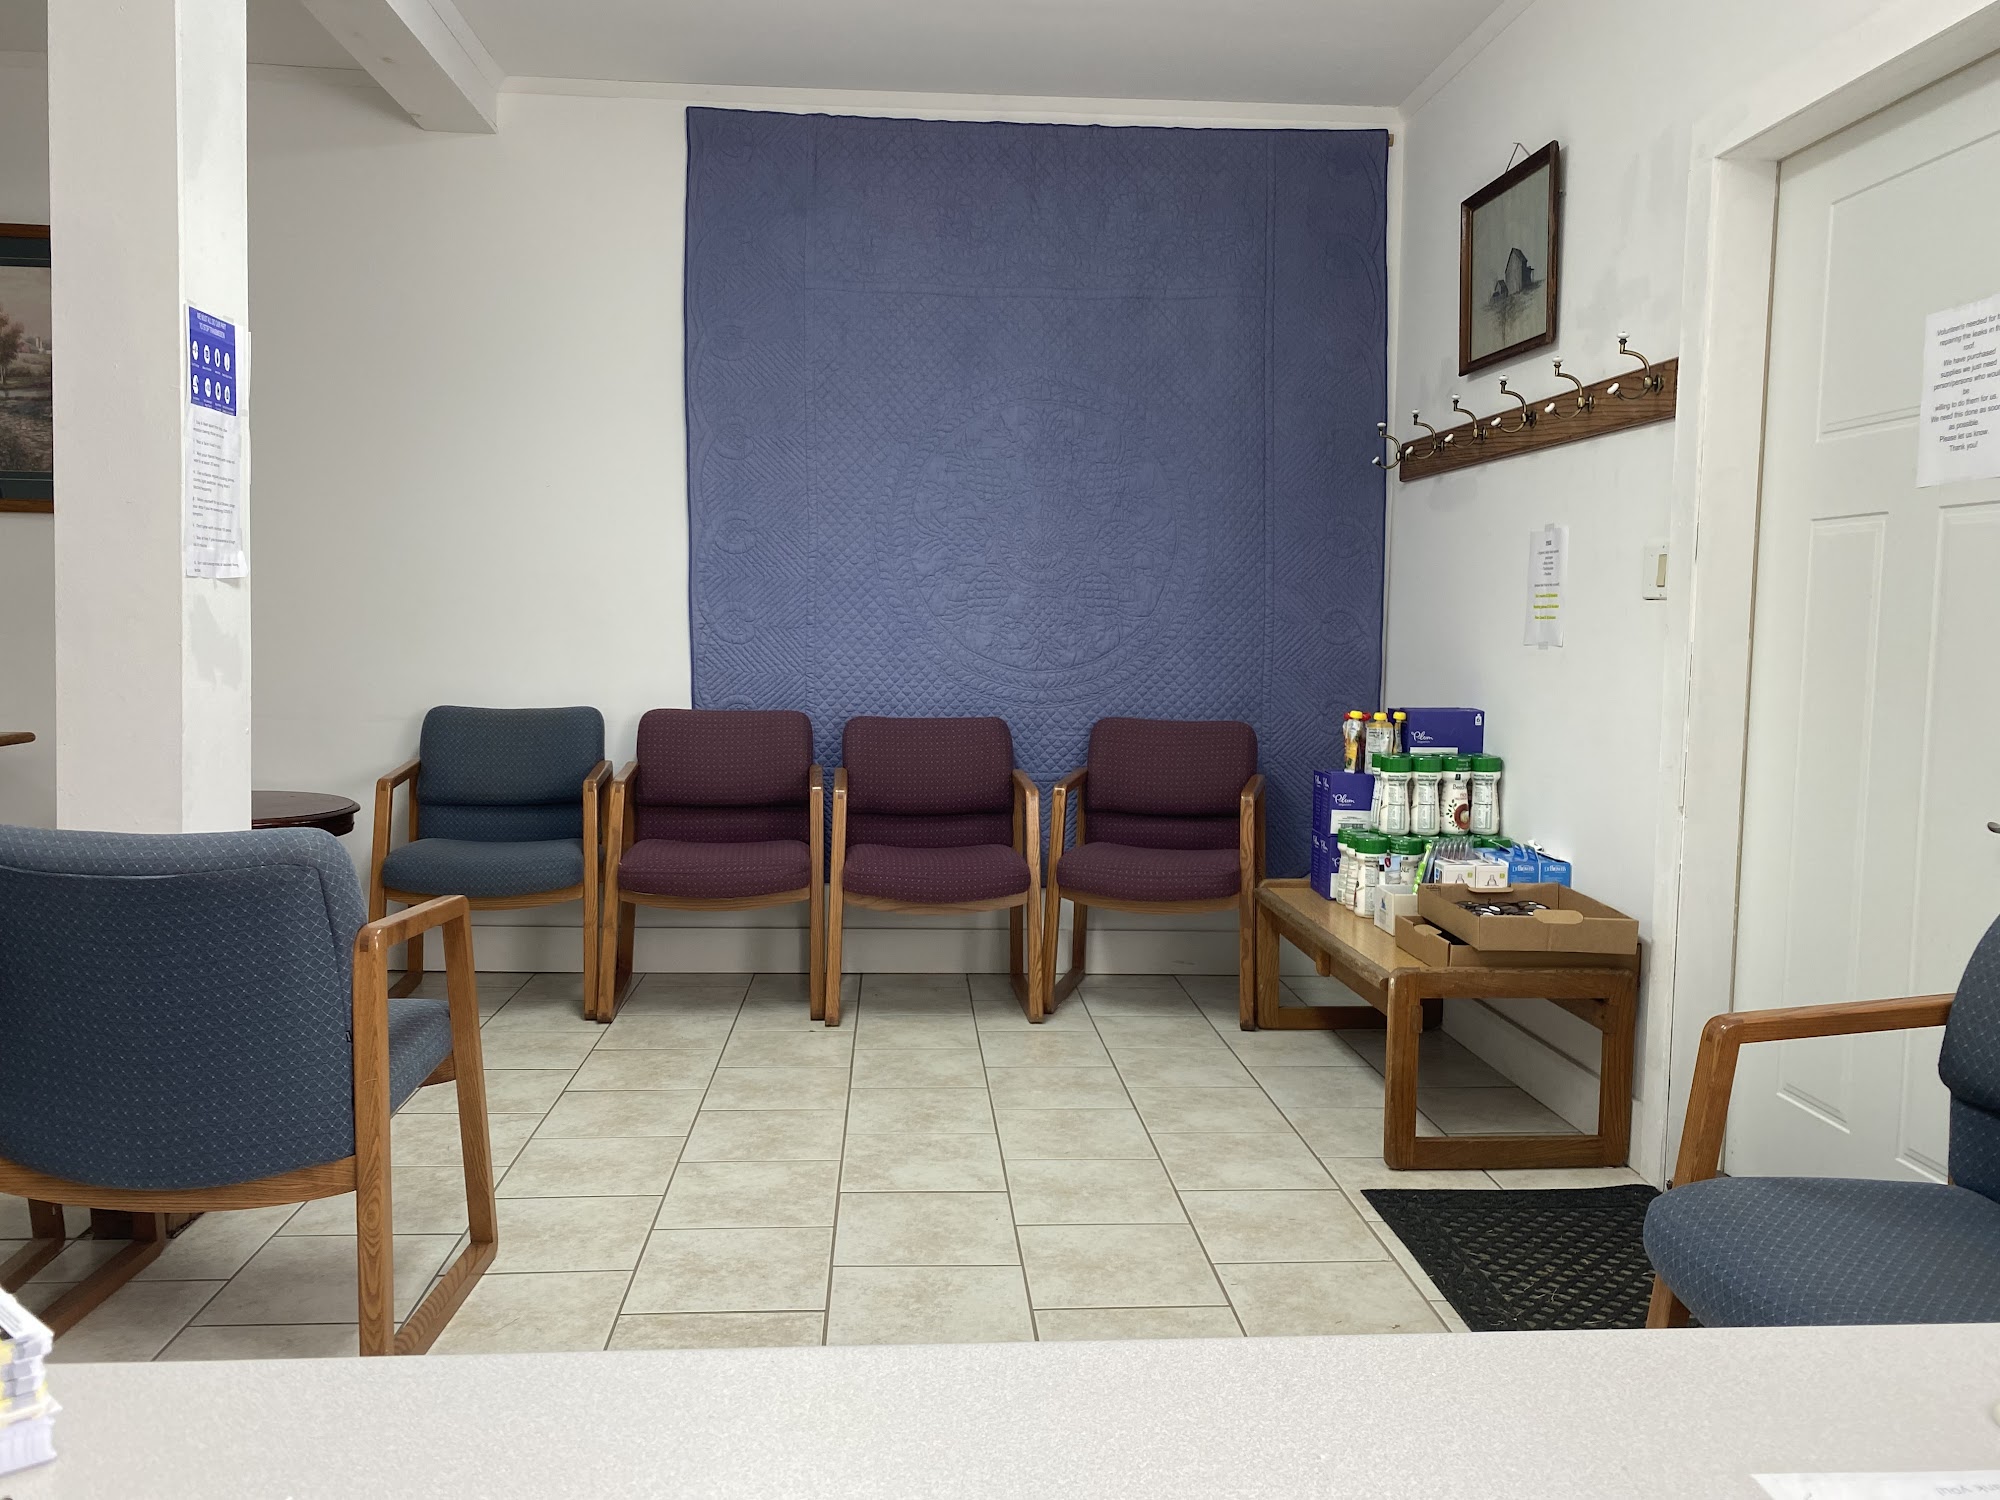 Amish Outreach Clinic 4549 State Hwy C, Seymour Missouri 65746